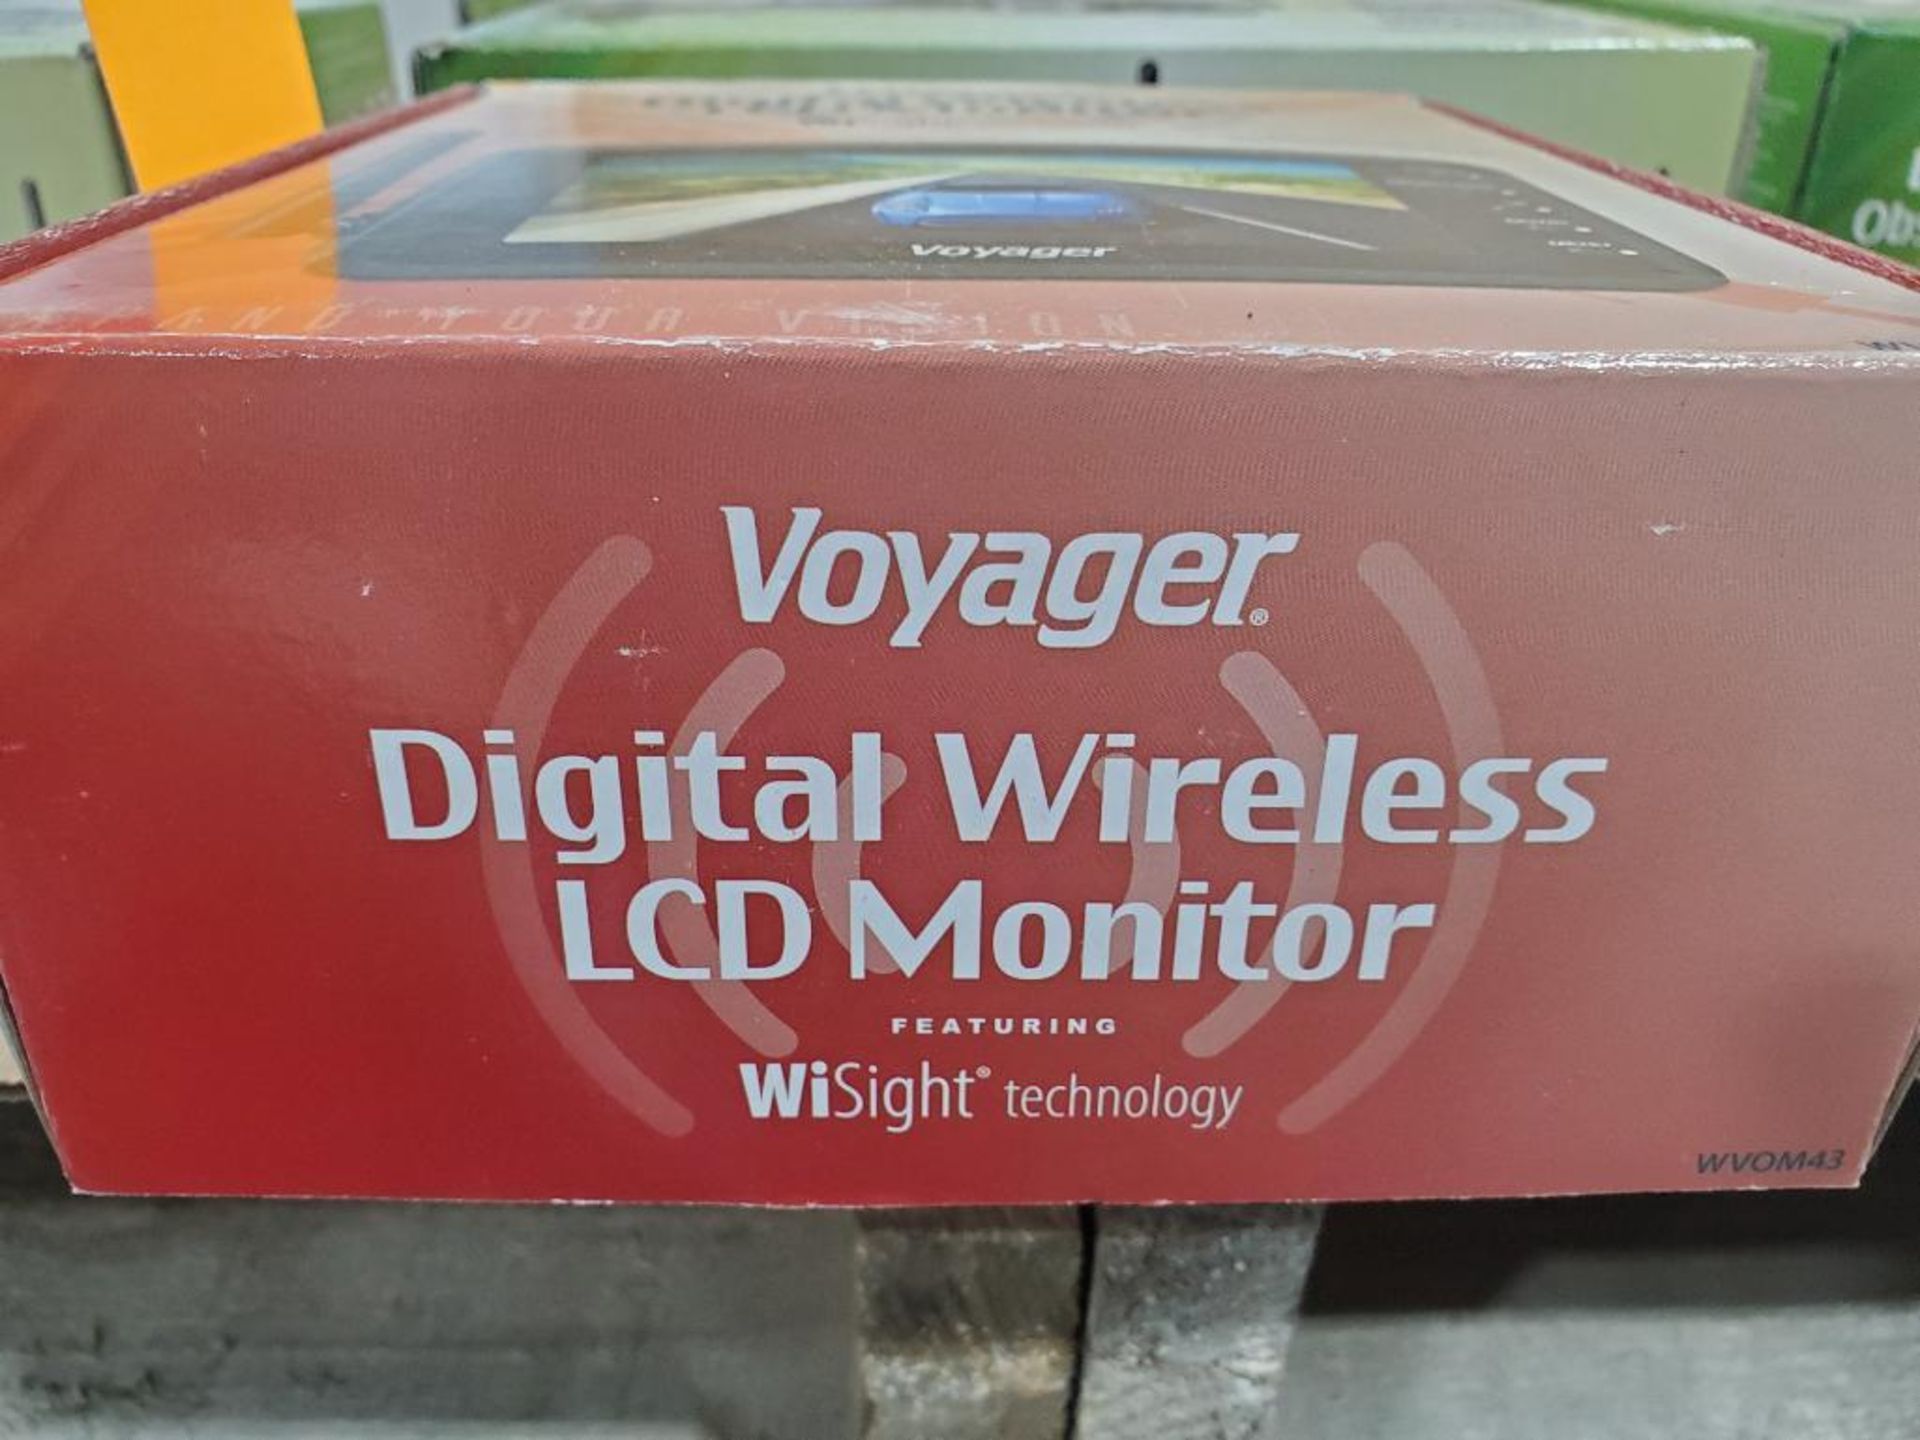 Voyager Digital Wireless LCD Monitor. Part number WVOM43. - Image 3 of 5